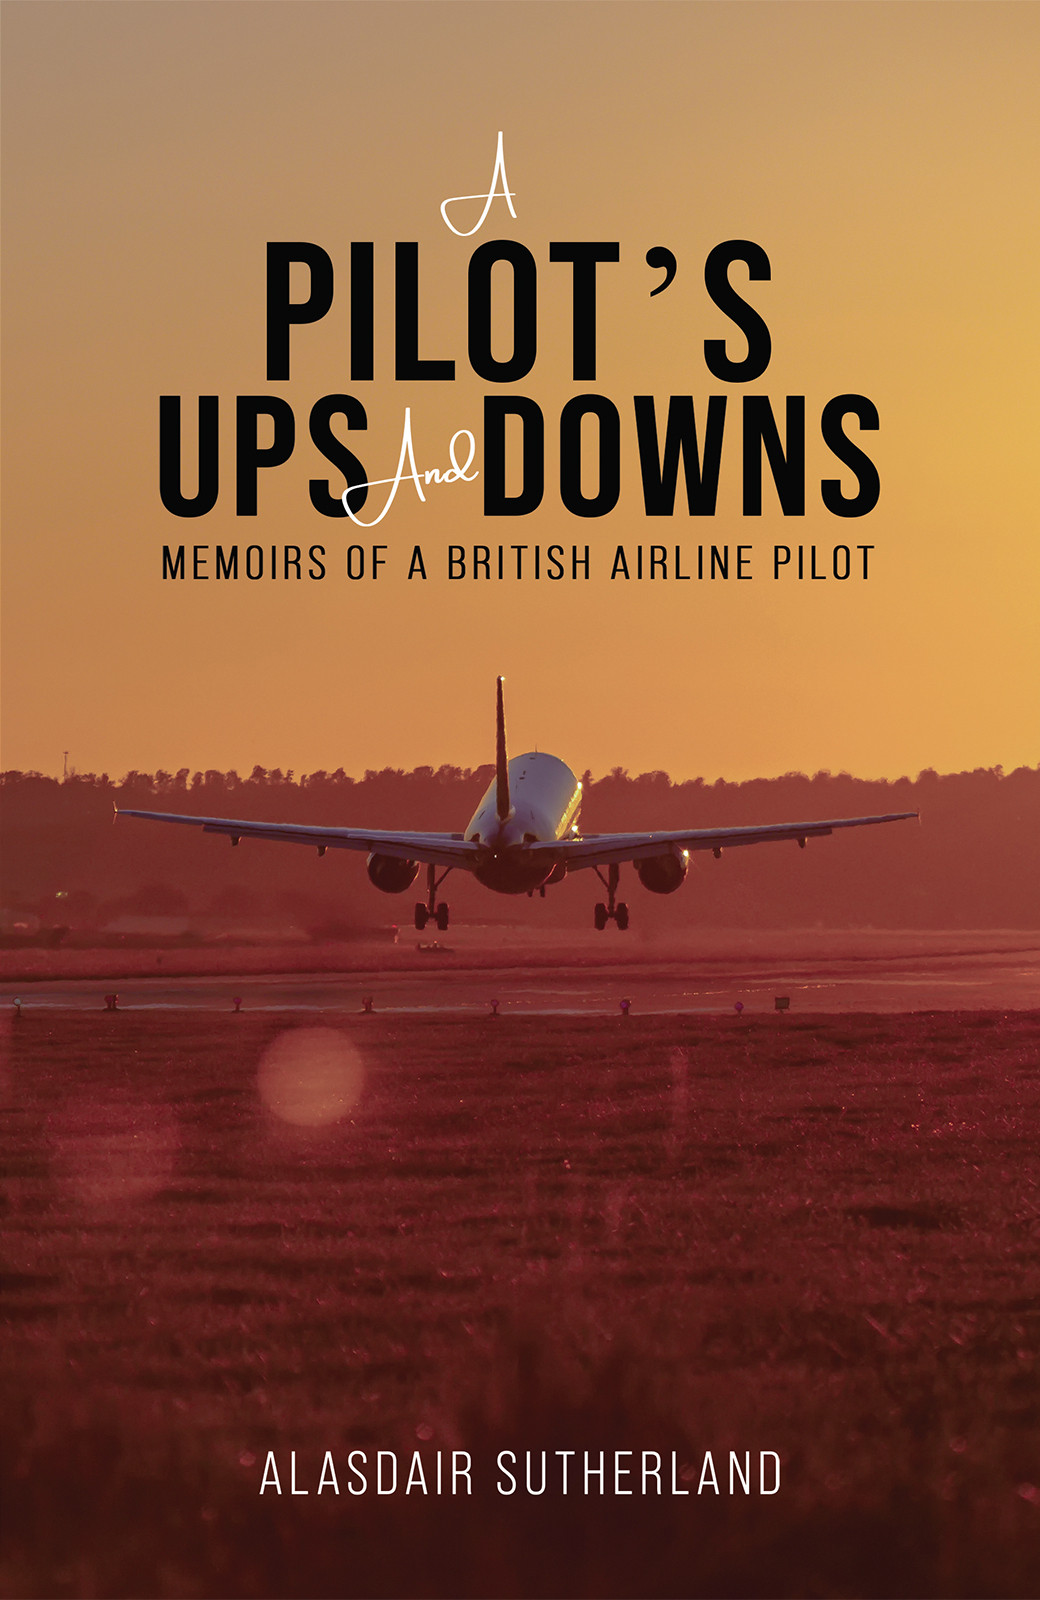 A Pilot's Ups and Downs